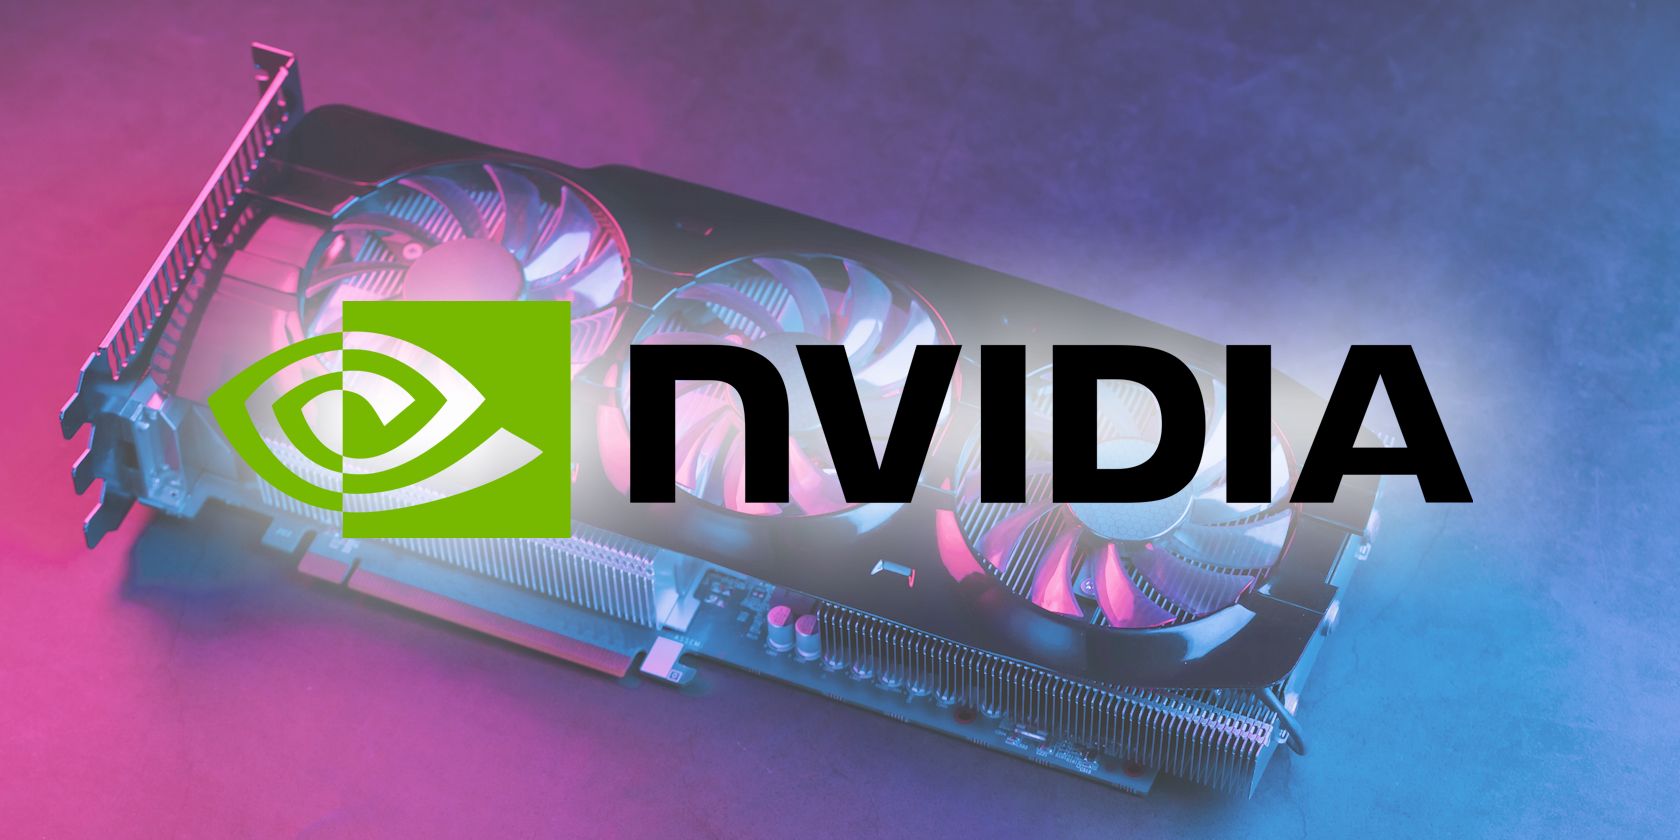 nvidia logo on top of graphics card background